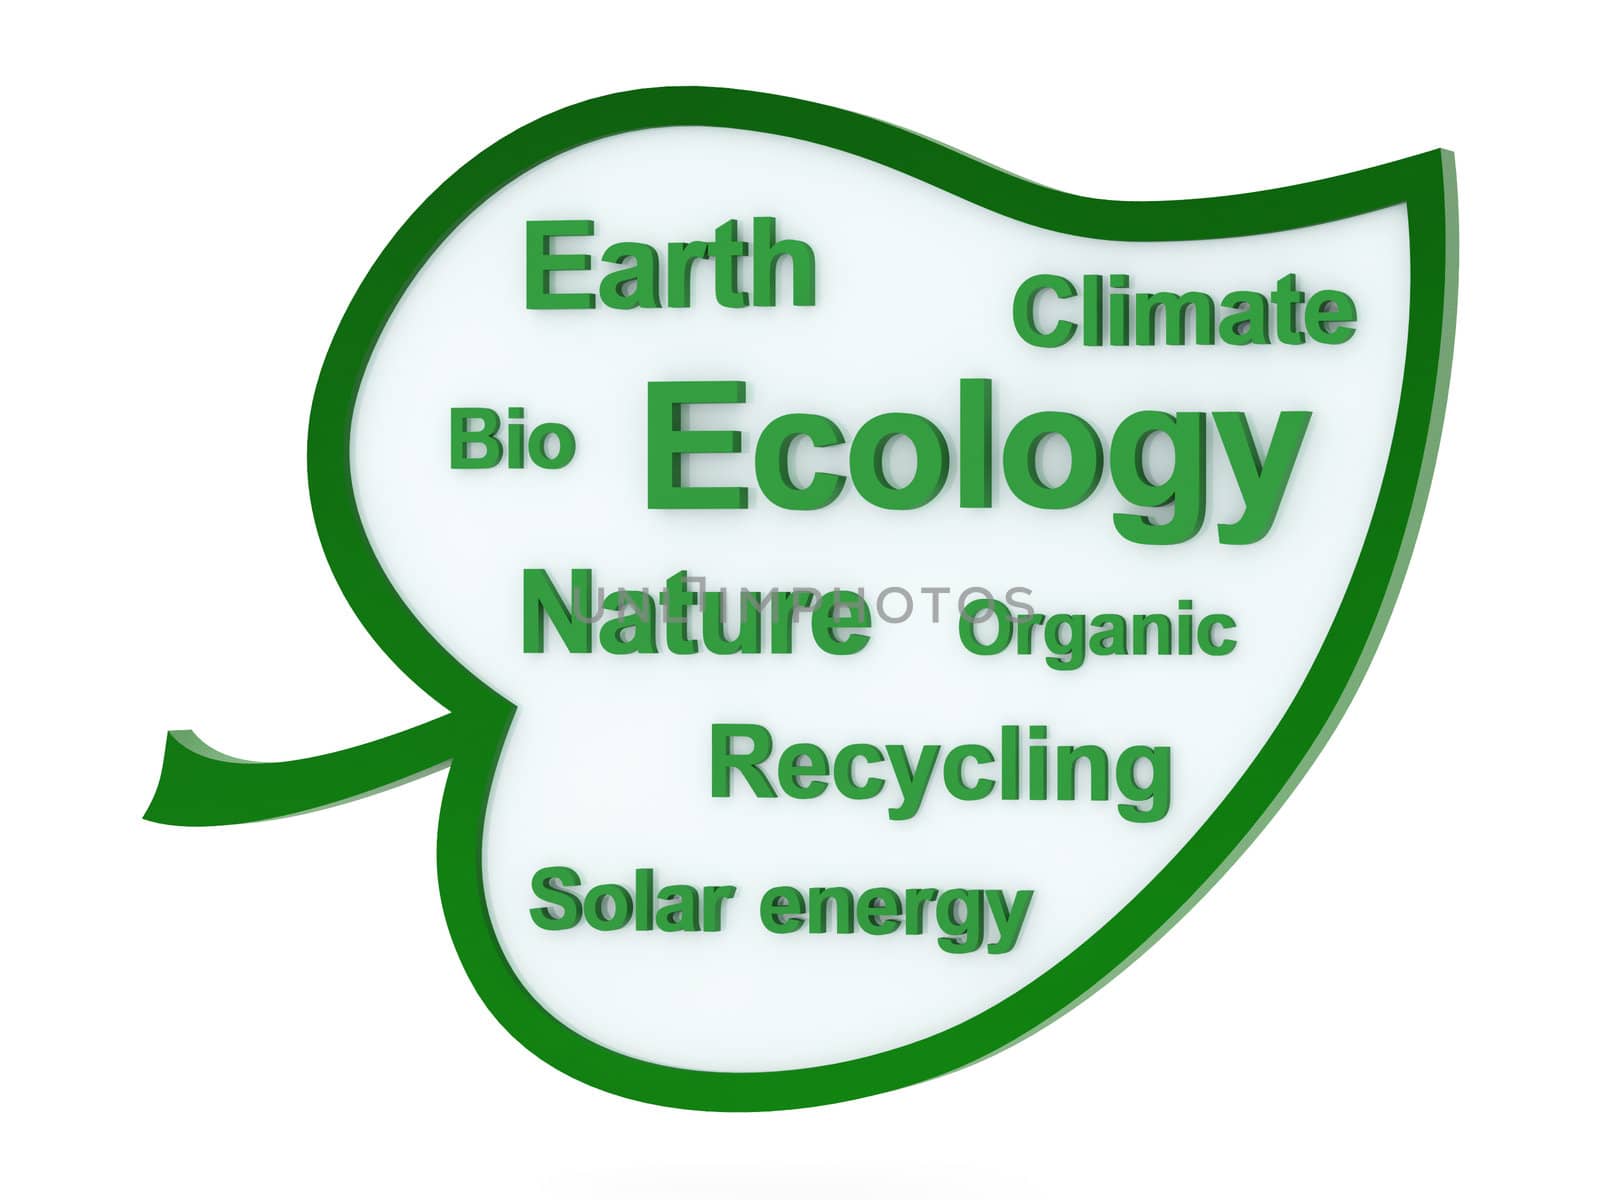 Speech bubble or tag cloud with ecological words by maxkabakov